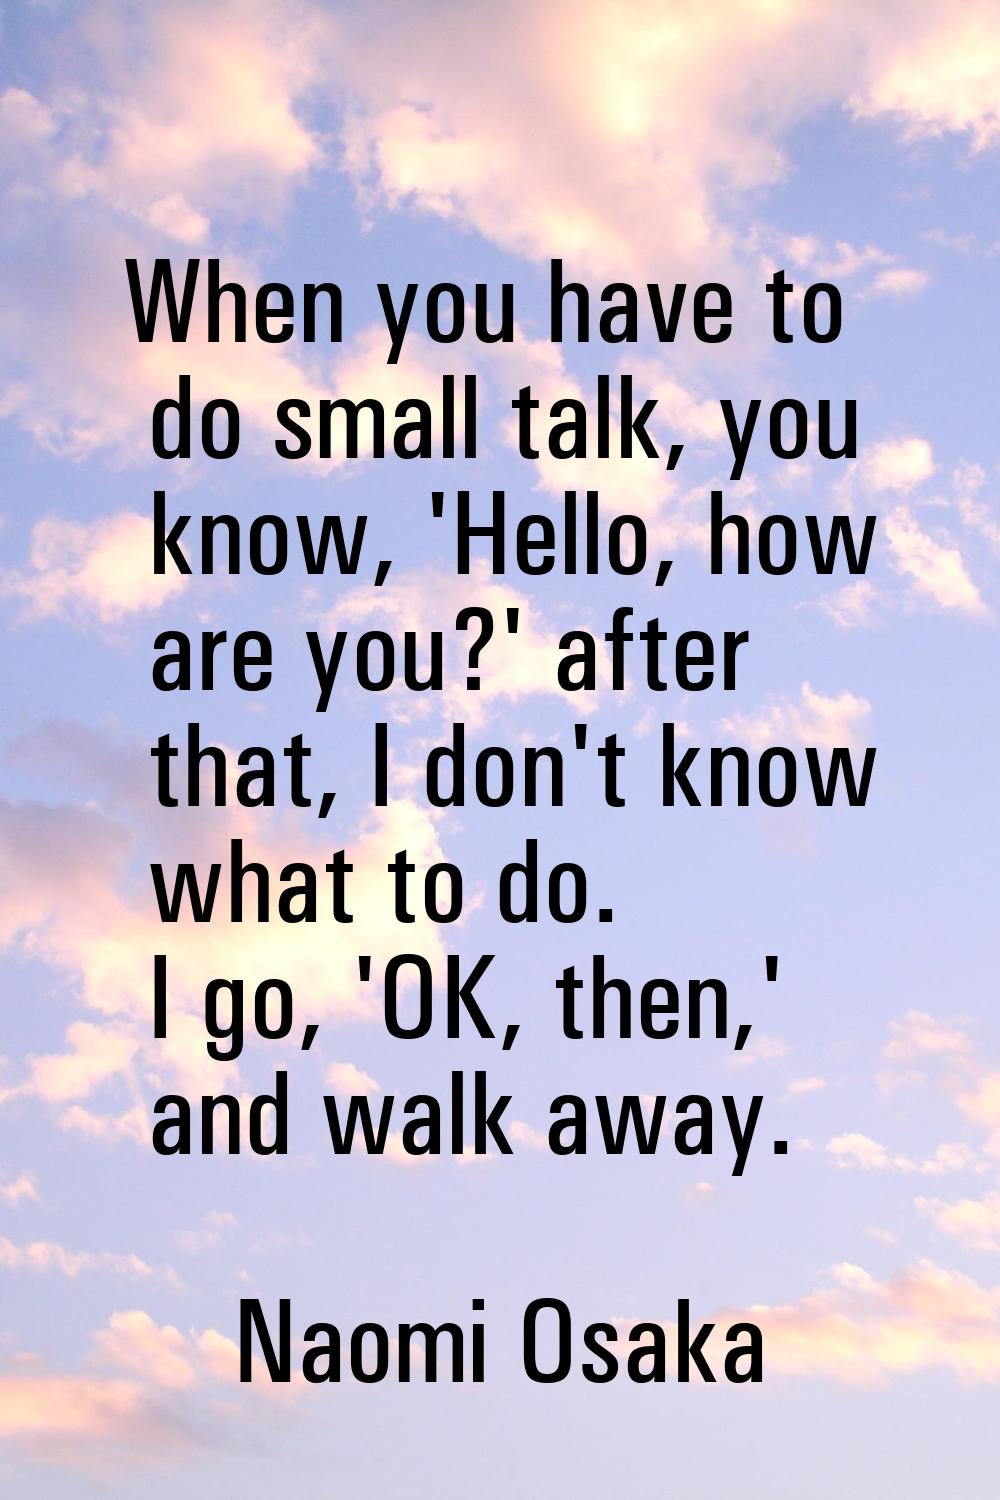 When you have to do small talk, you know, 'Hello, how are you?' after that, I don't know what to do